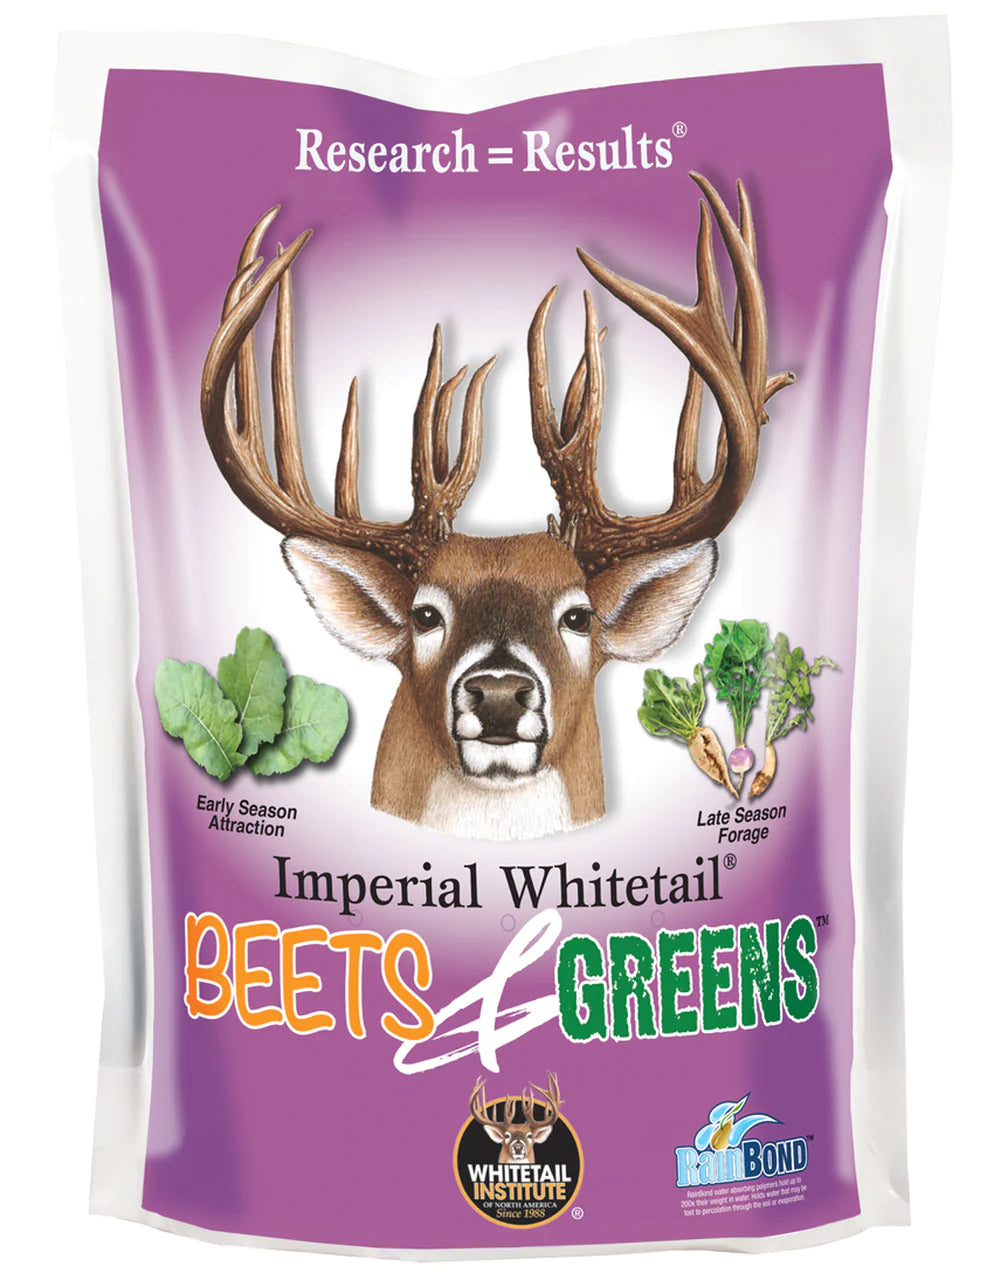 Whitetail Institute Beets & Greens